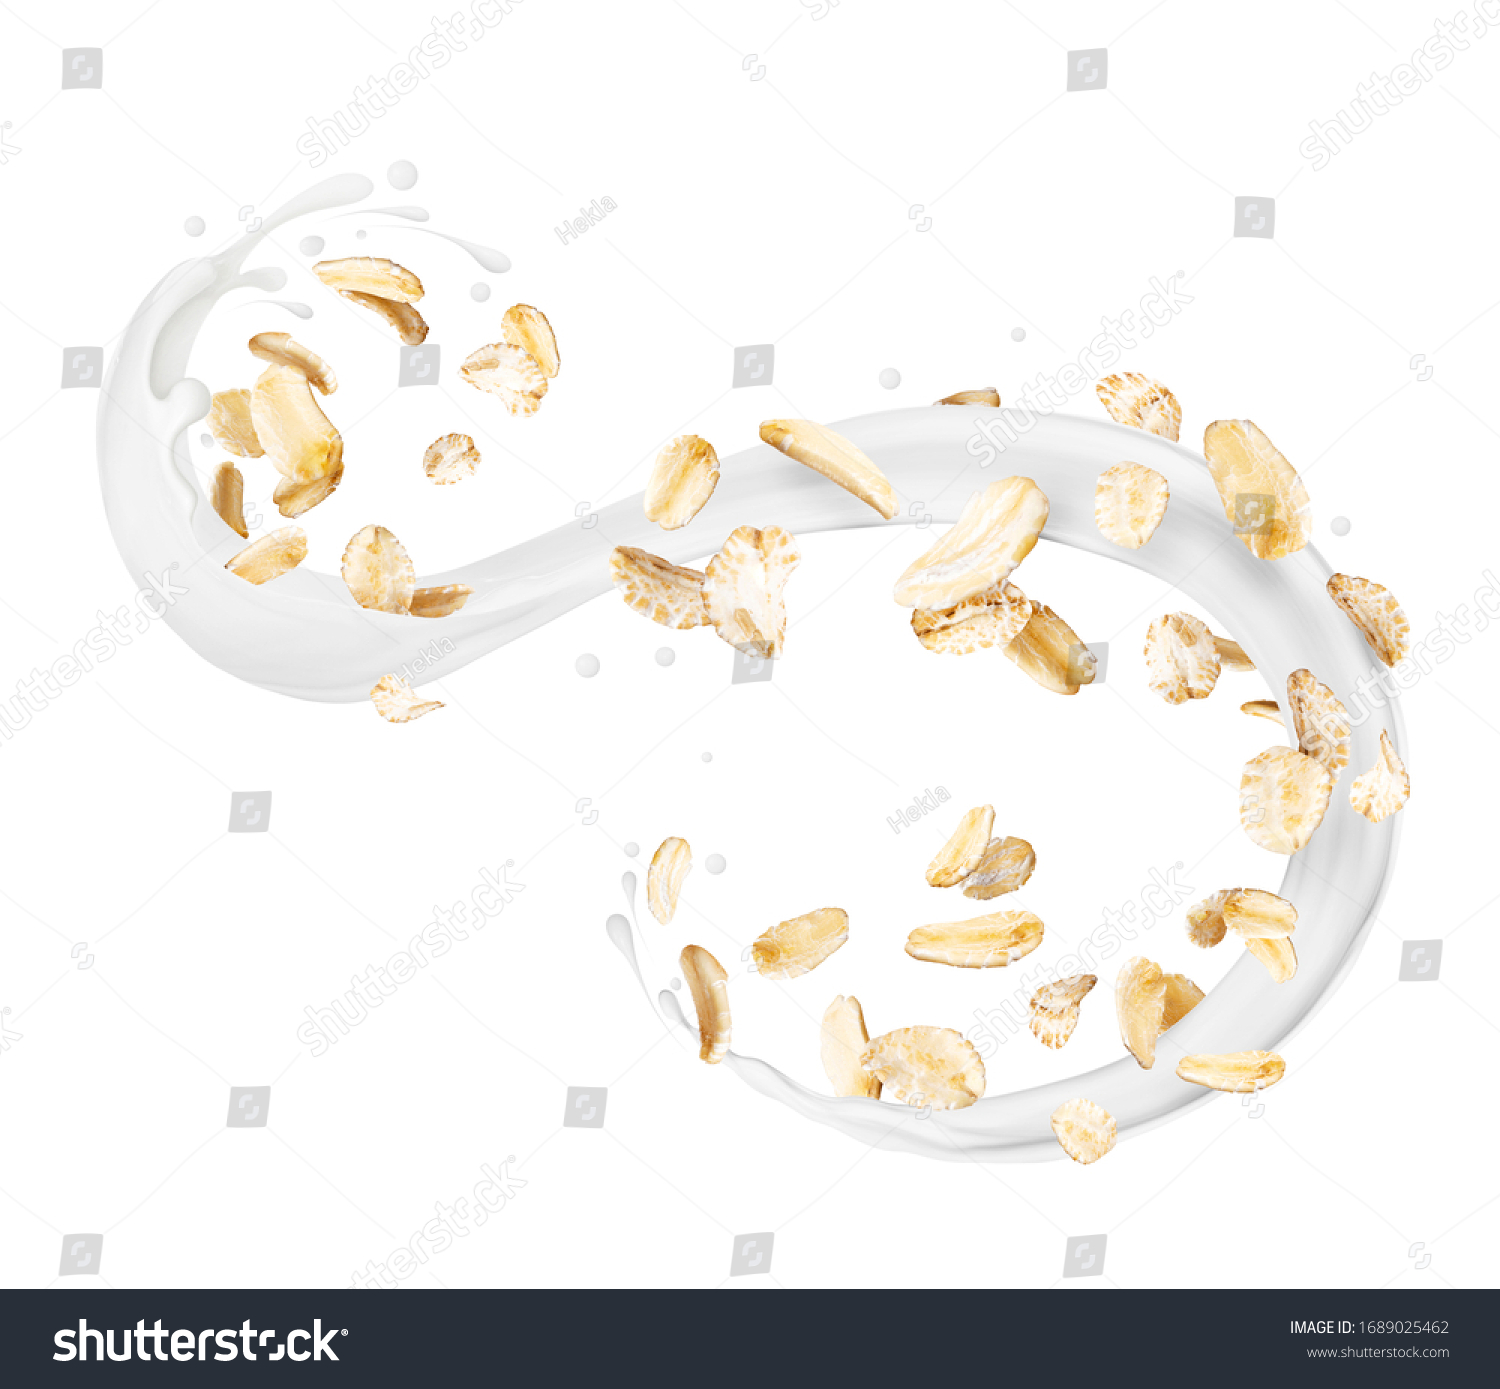 Oat flakes in milk splashes isolated on a white background #1689025462